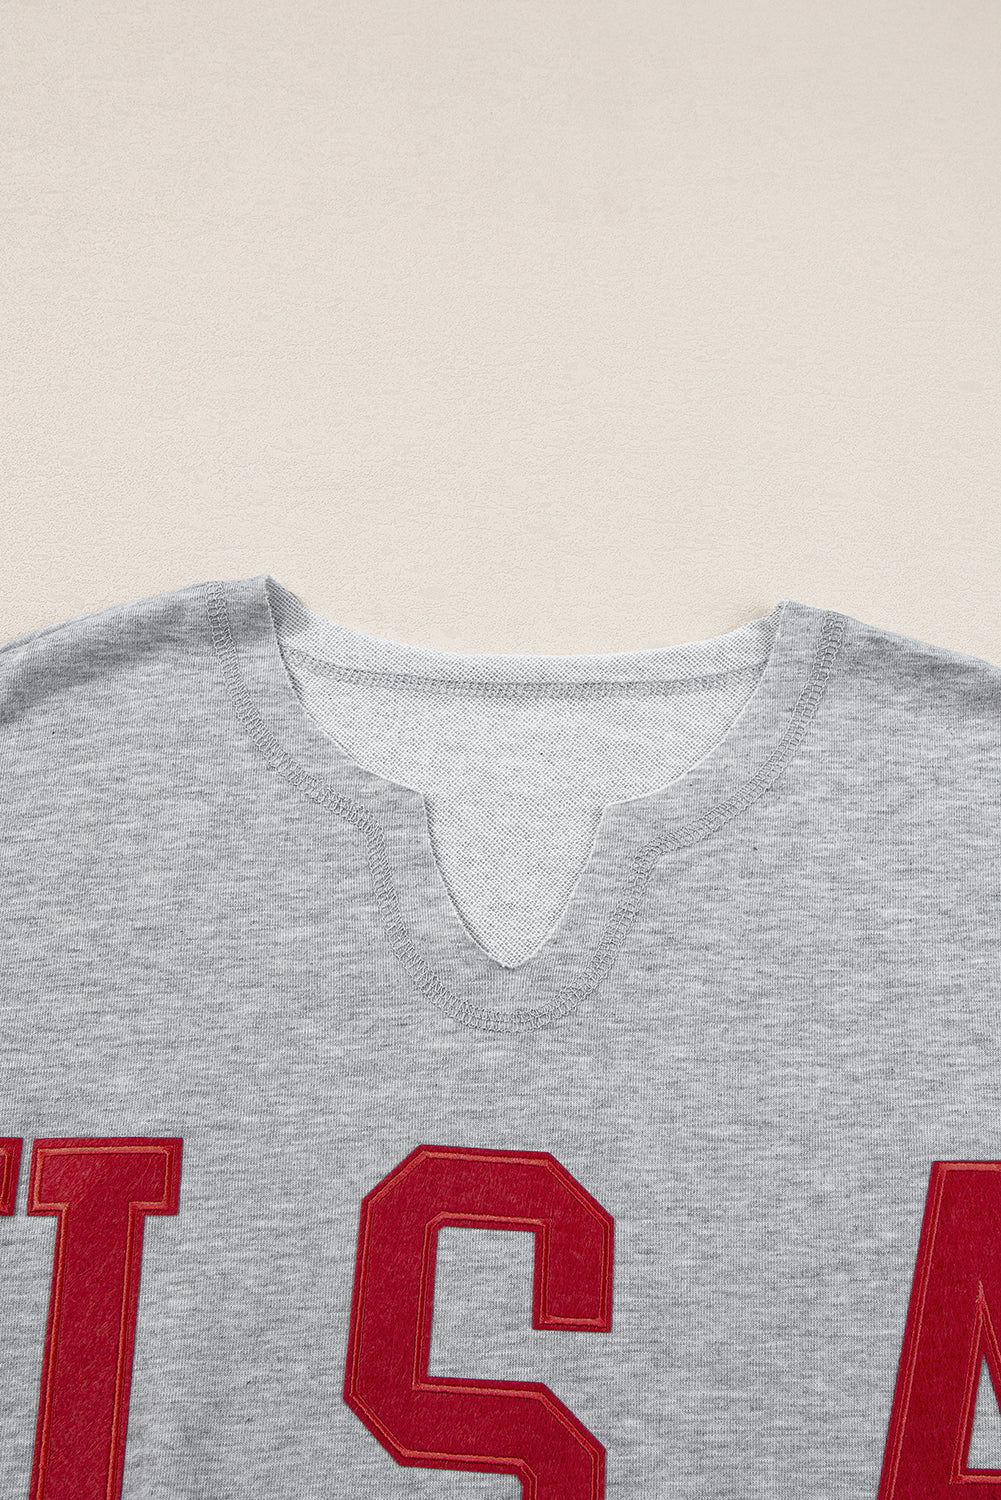 a gray t - shirt with red letters on it